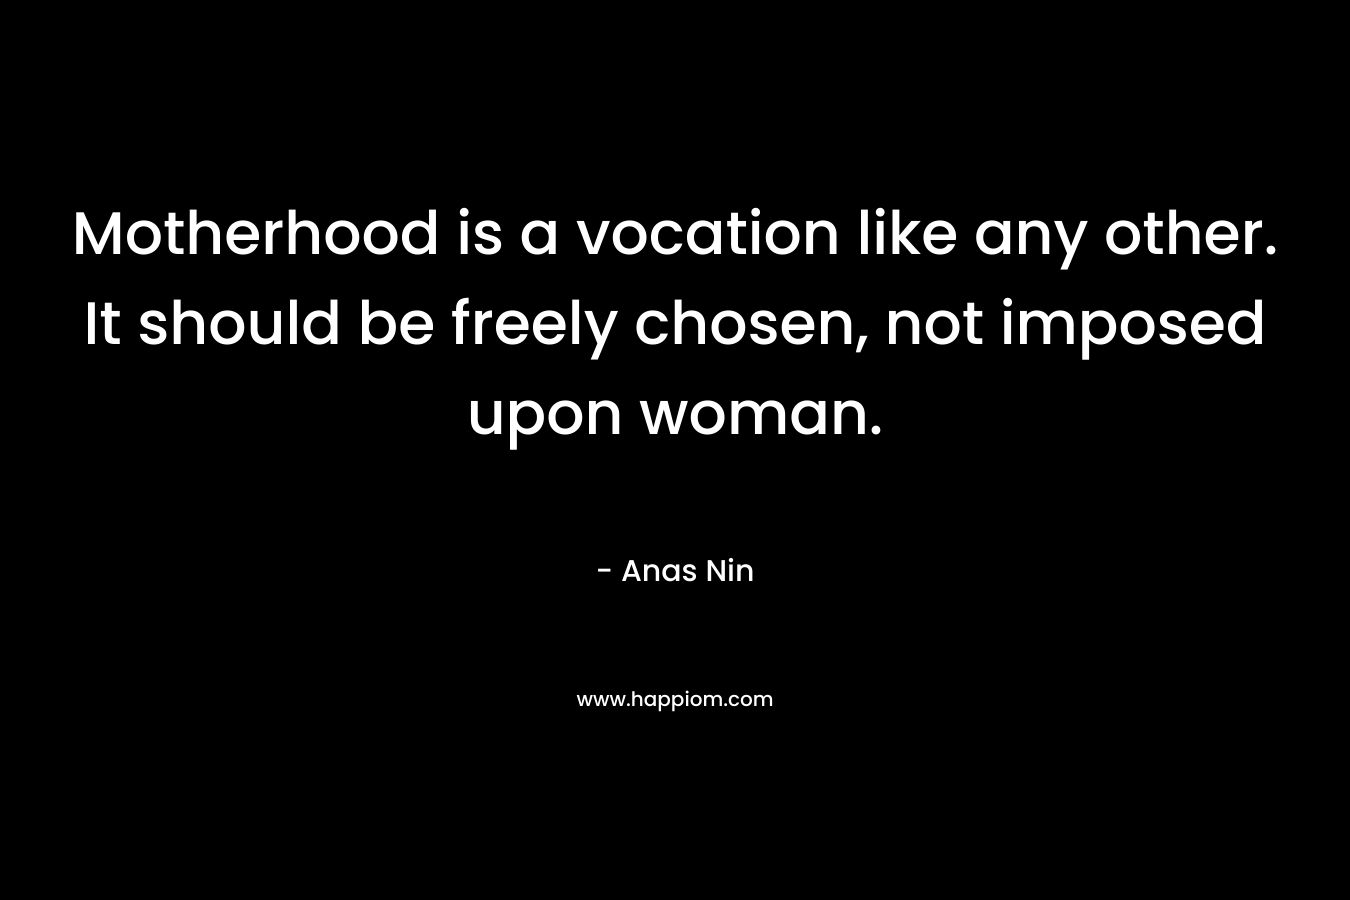 Motherhood is a vocation like any other. It should be freely chosen, not imposed upon woman. – Anas Nin